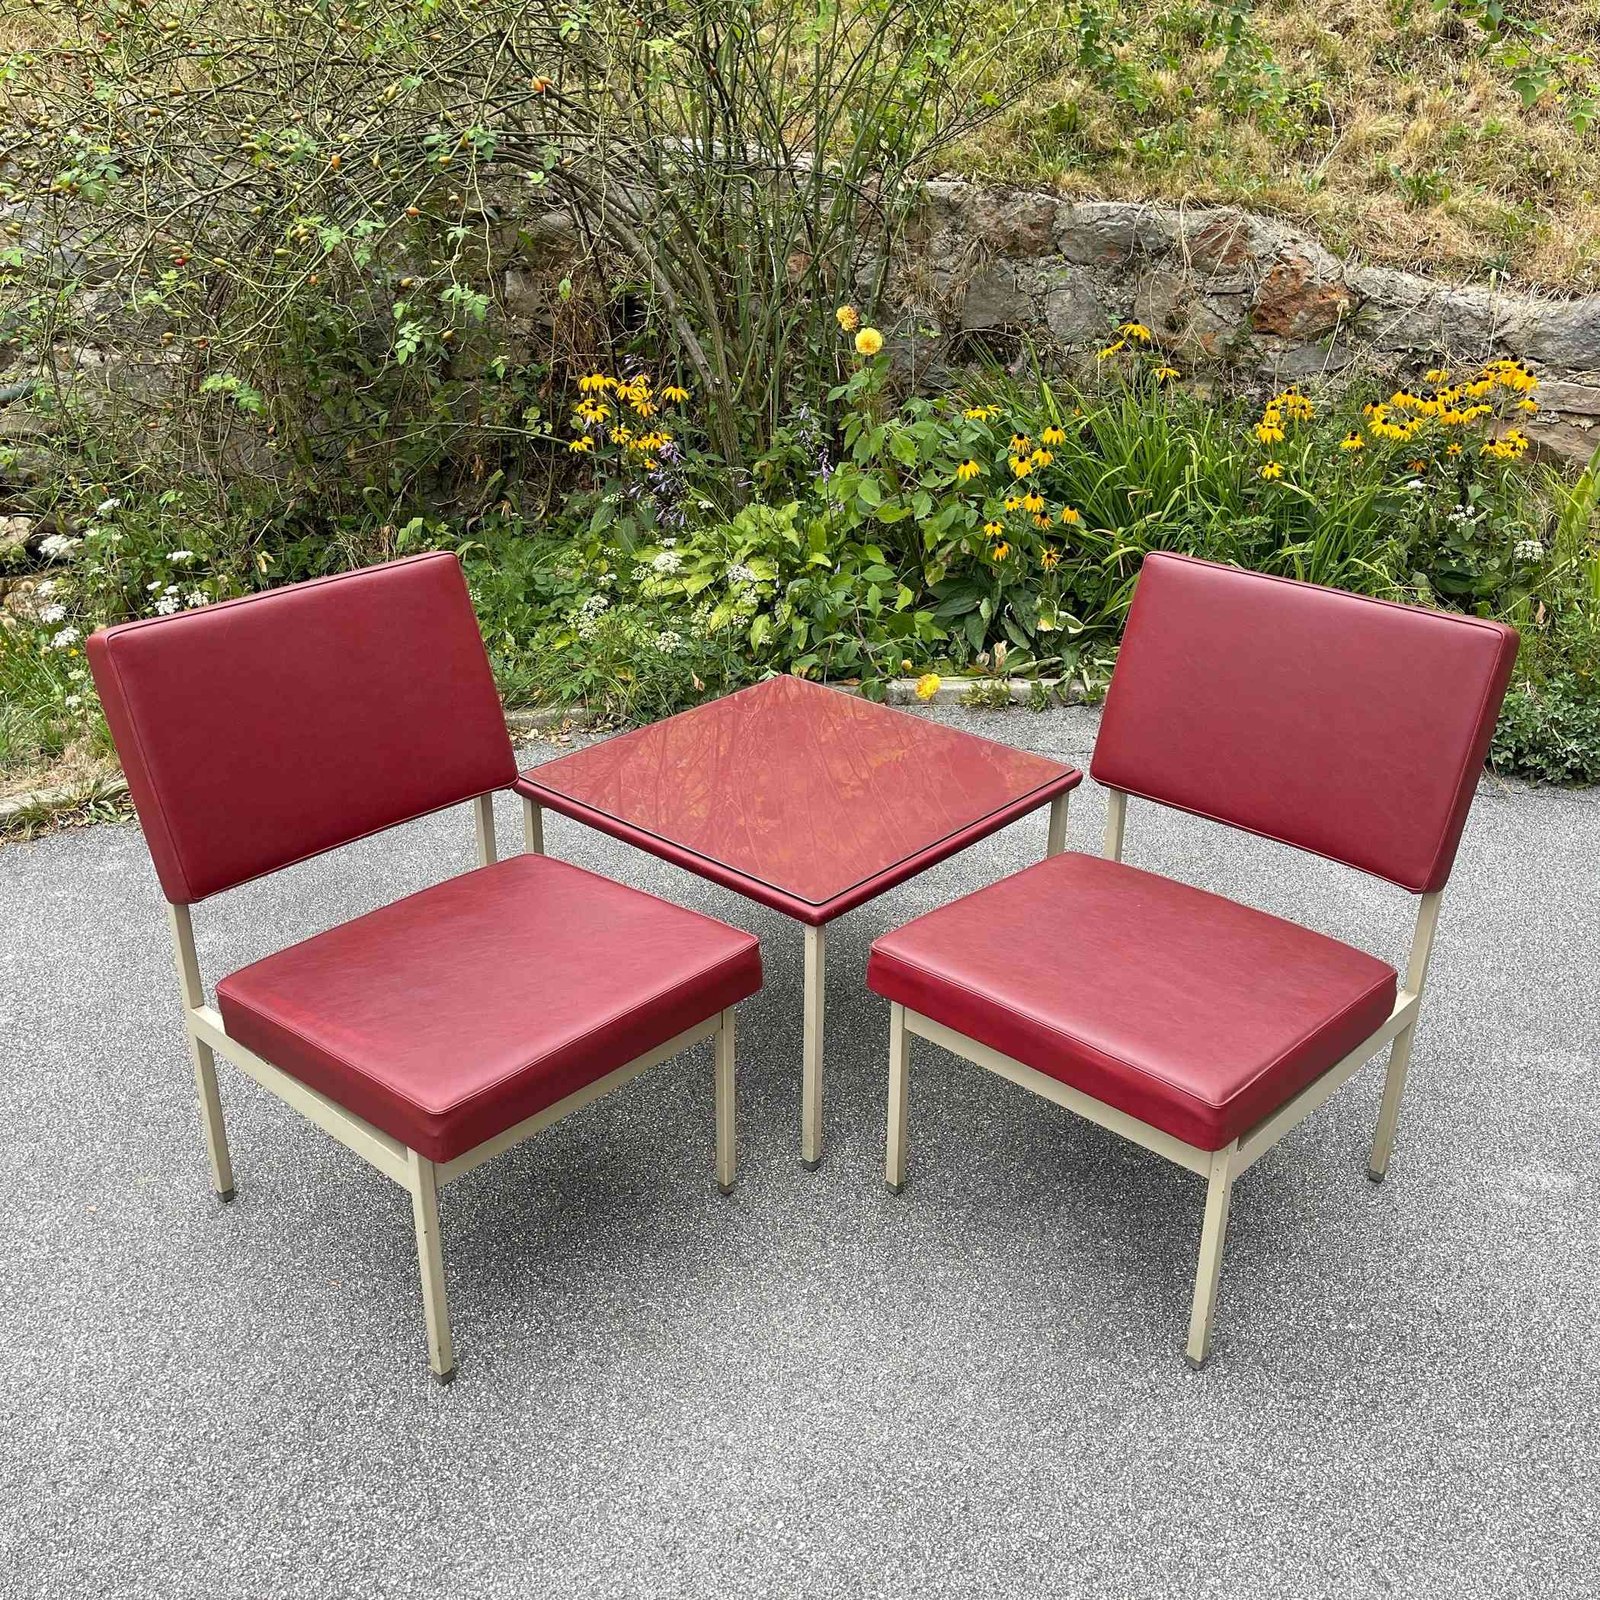 Set of 2 lounge chairs and coffee table by Anonima Castelli Italy 1950s Mid-century italian modern Rare vintage furniture